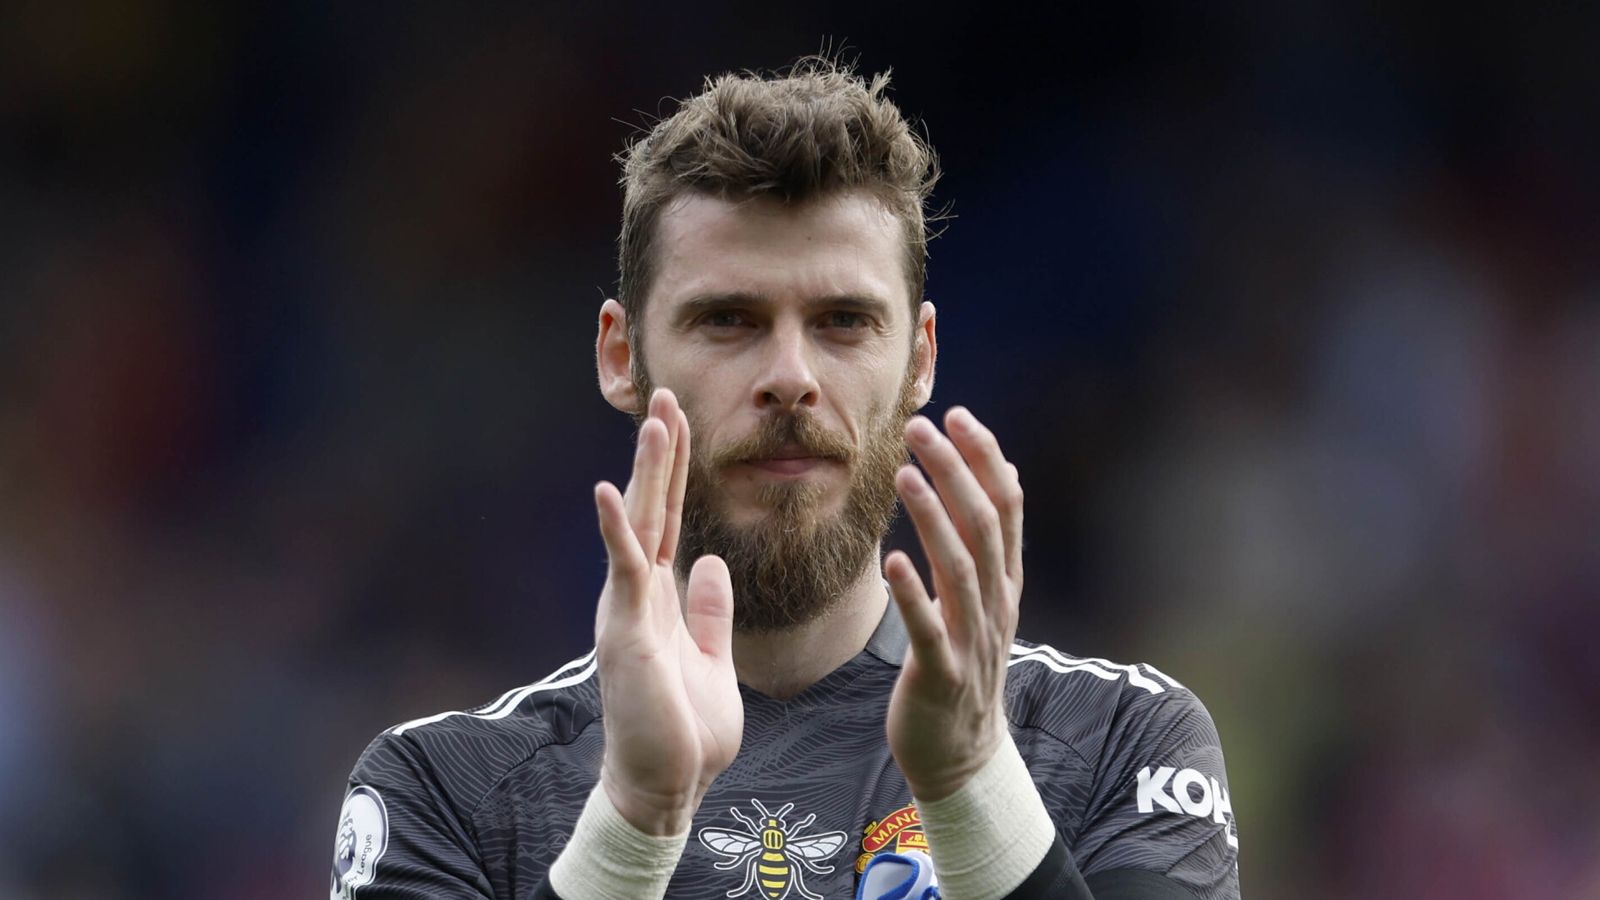 Man Utd goalkeeper David de Gea tells uncommitted team-mates to leave this summer